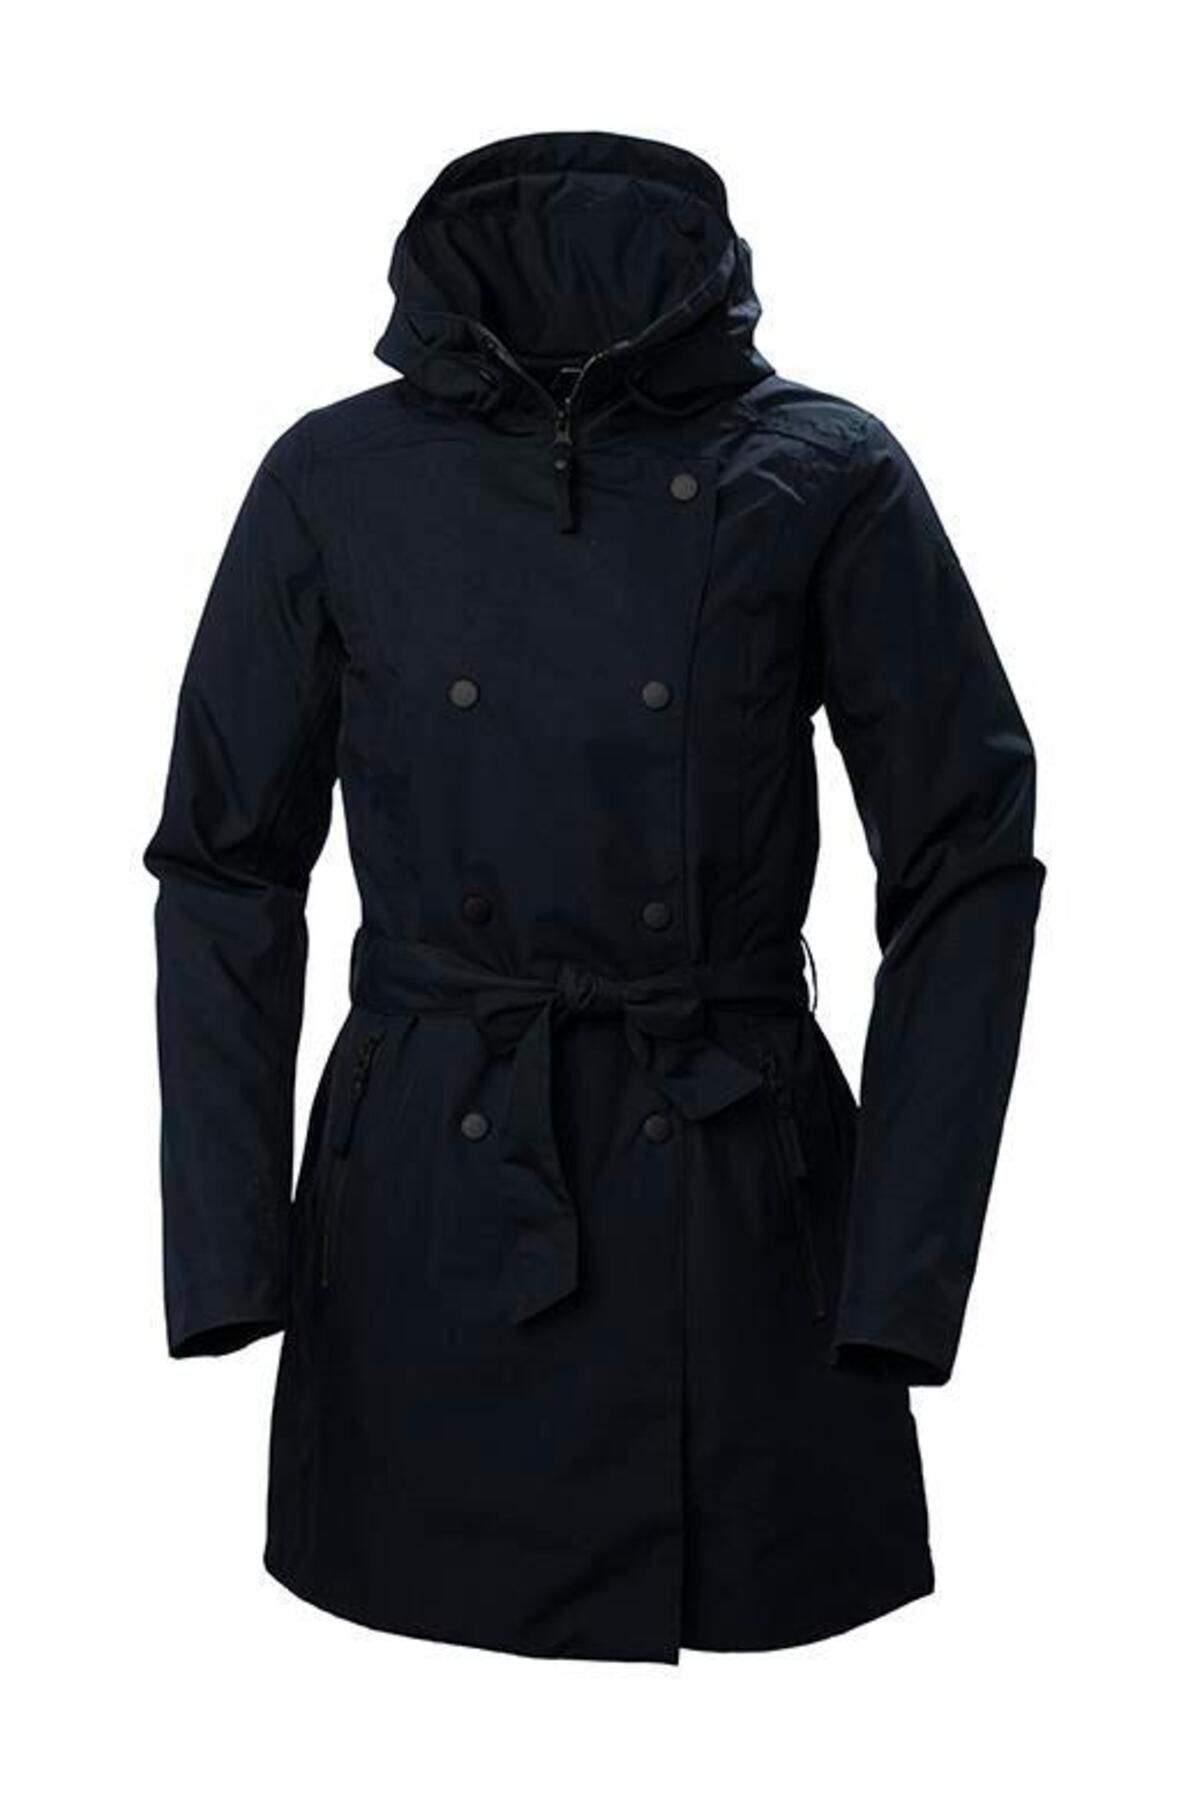 Helly Hansen W Welsey Ii Trench Insulated